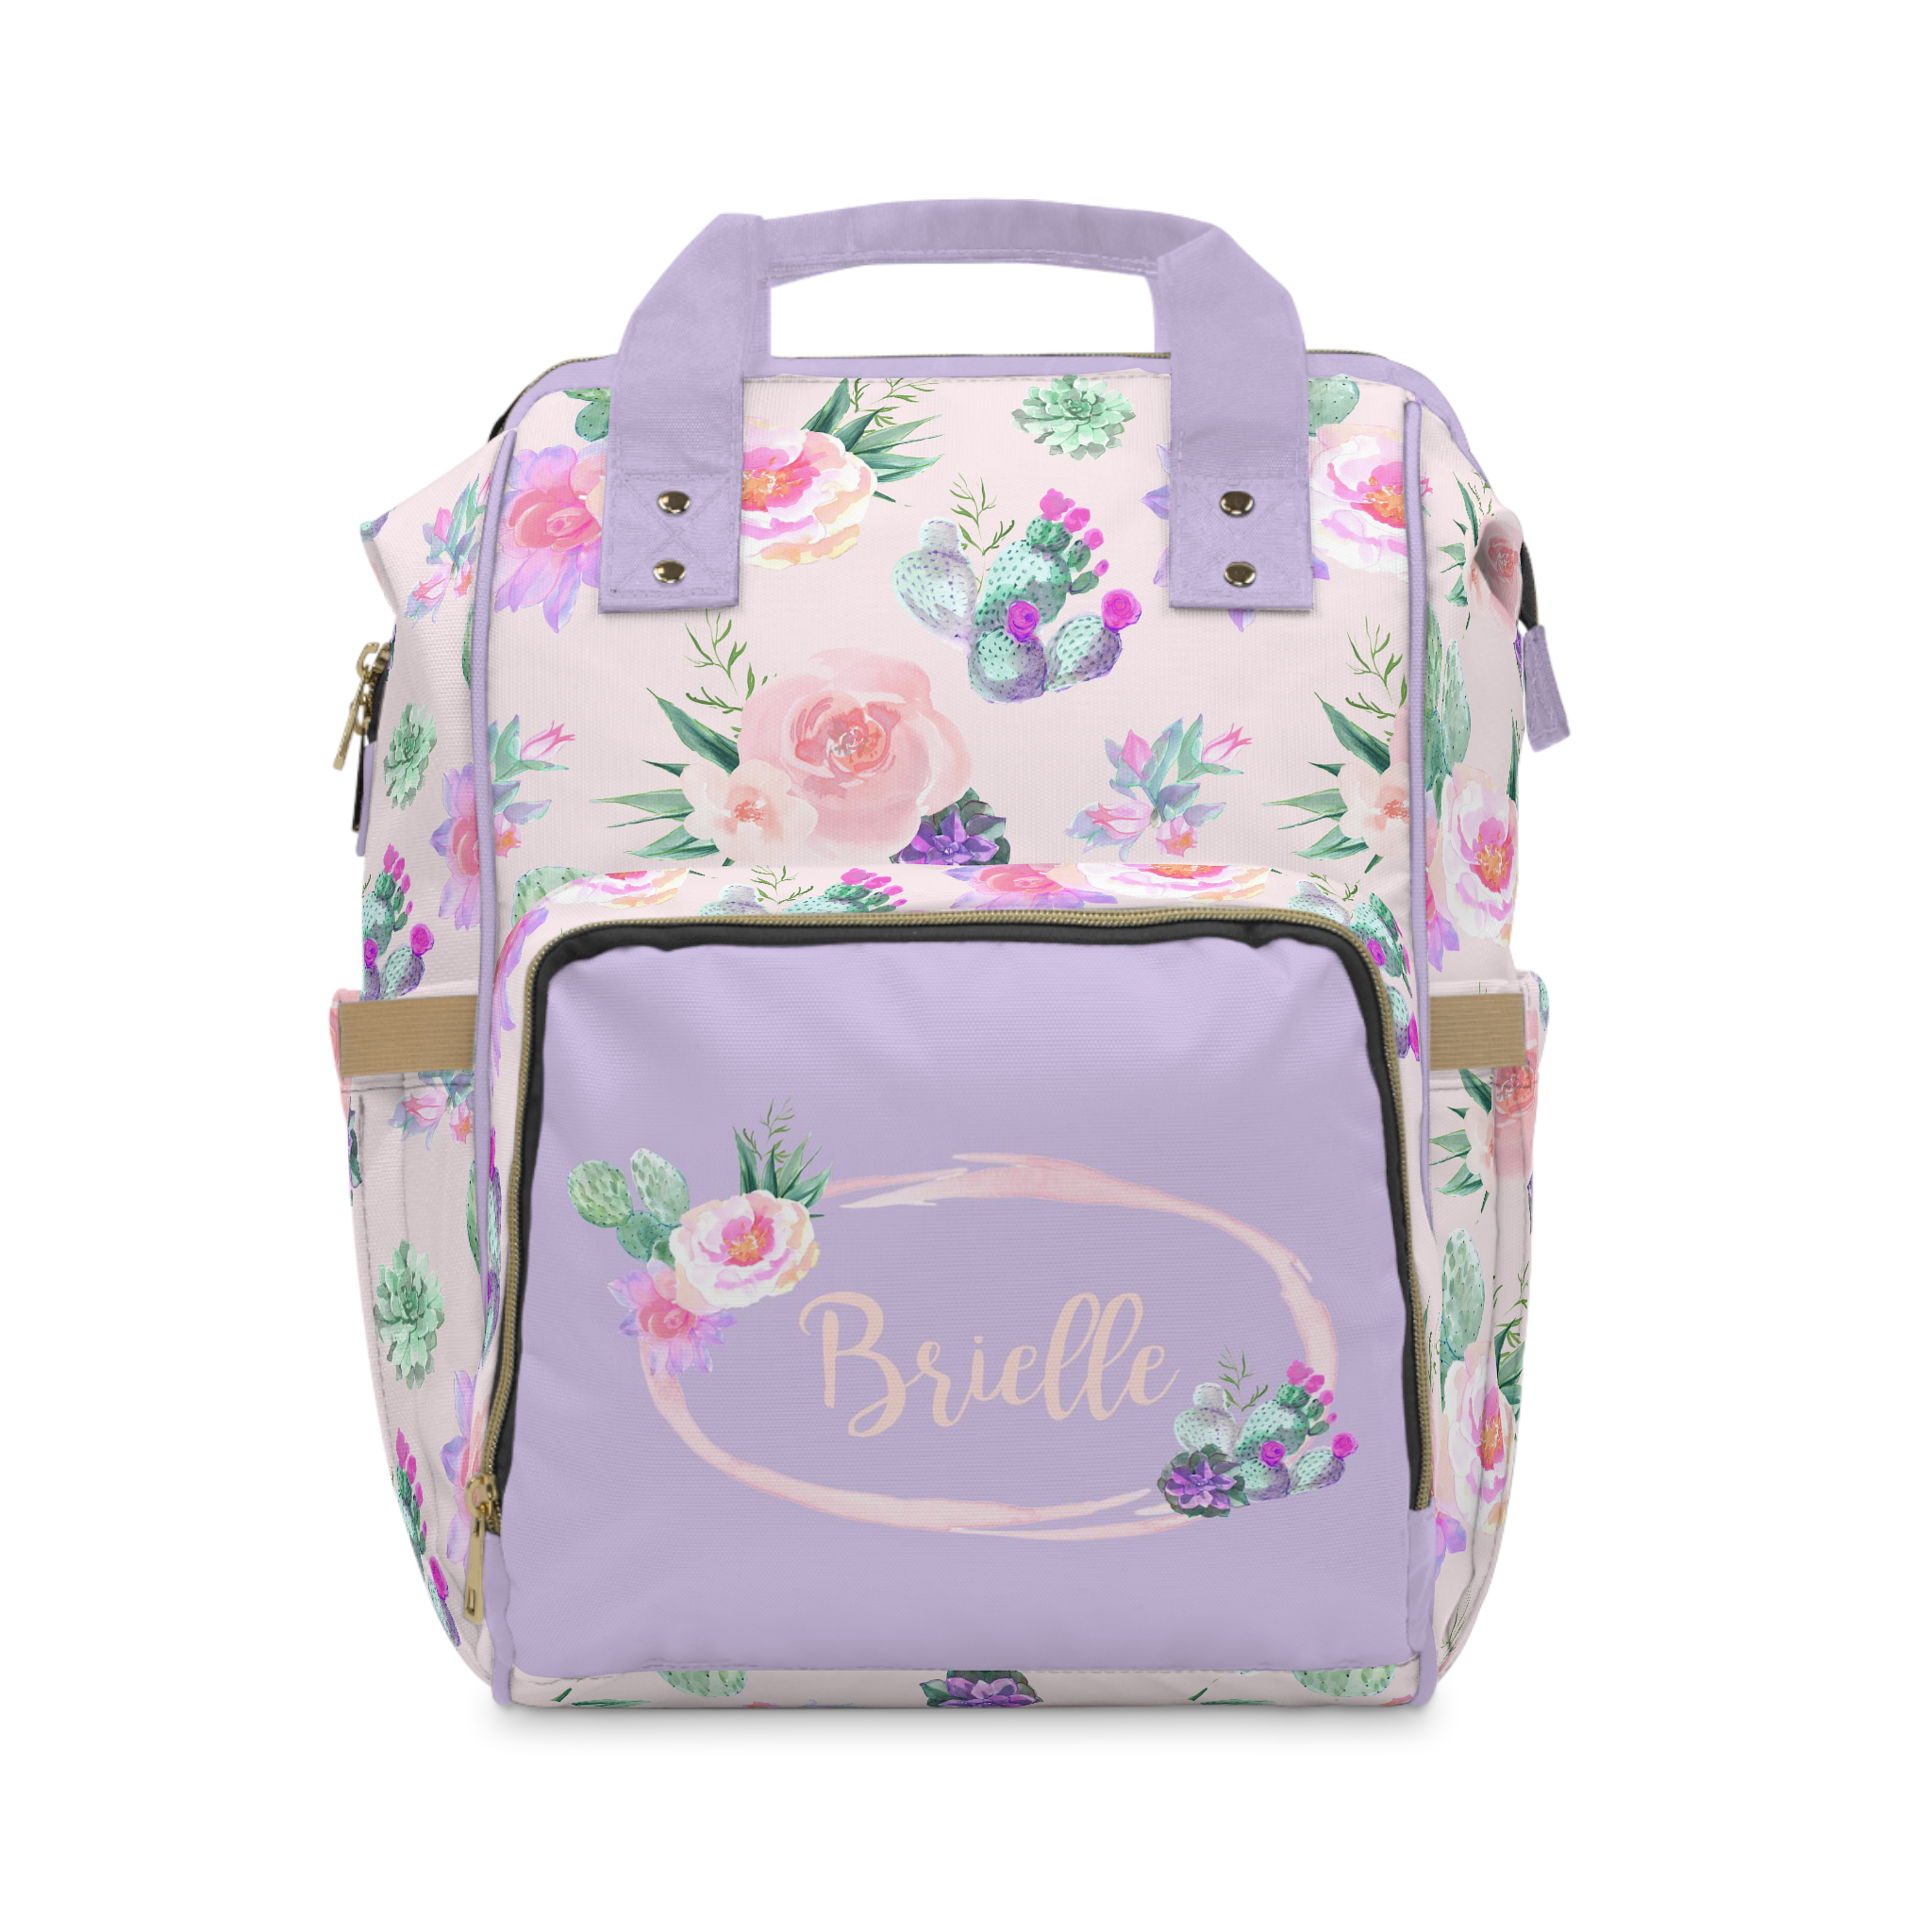 Cactus Floral Personalized Backpack Diaper Bag - Cactus Floral, gender_girl, text